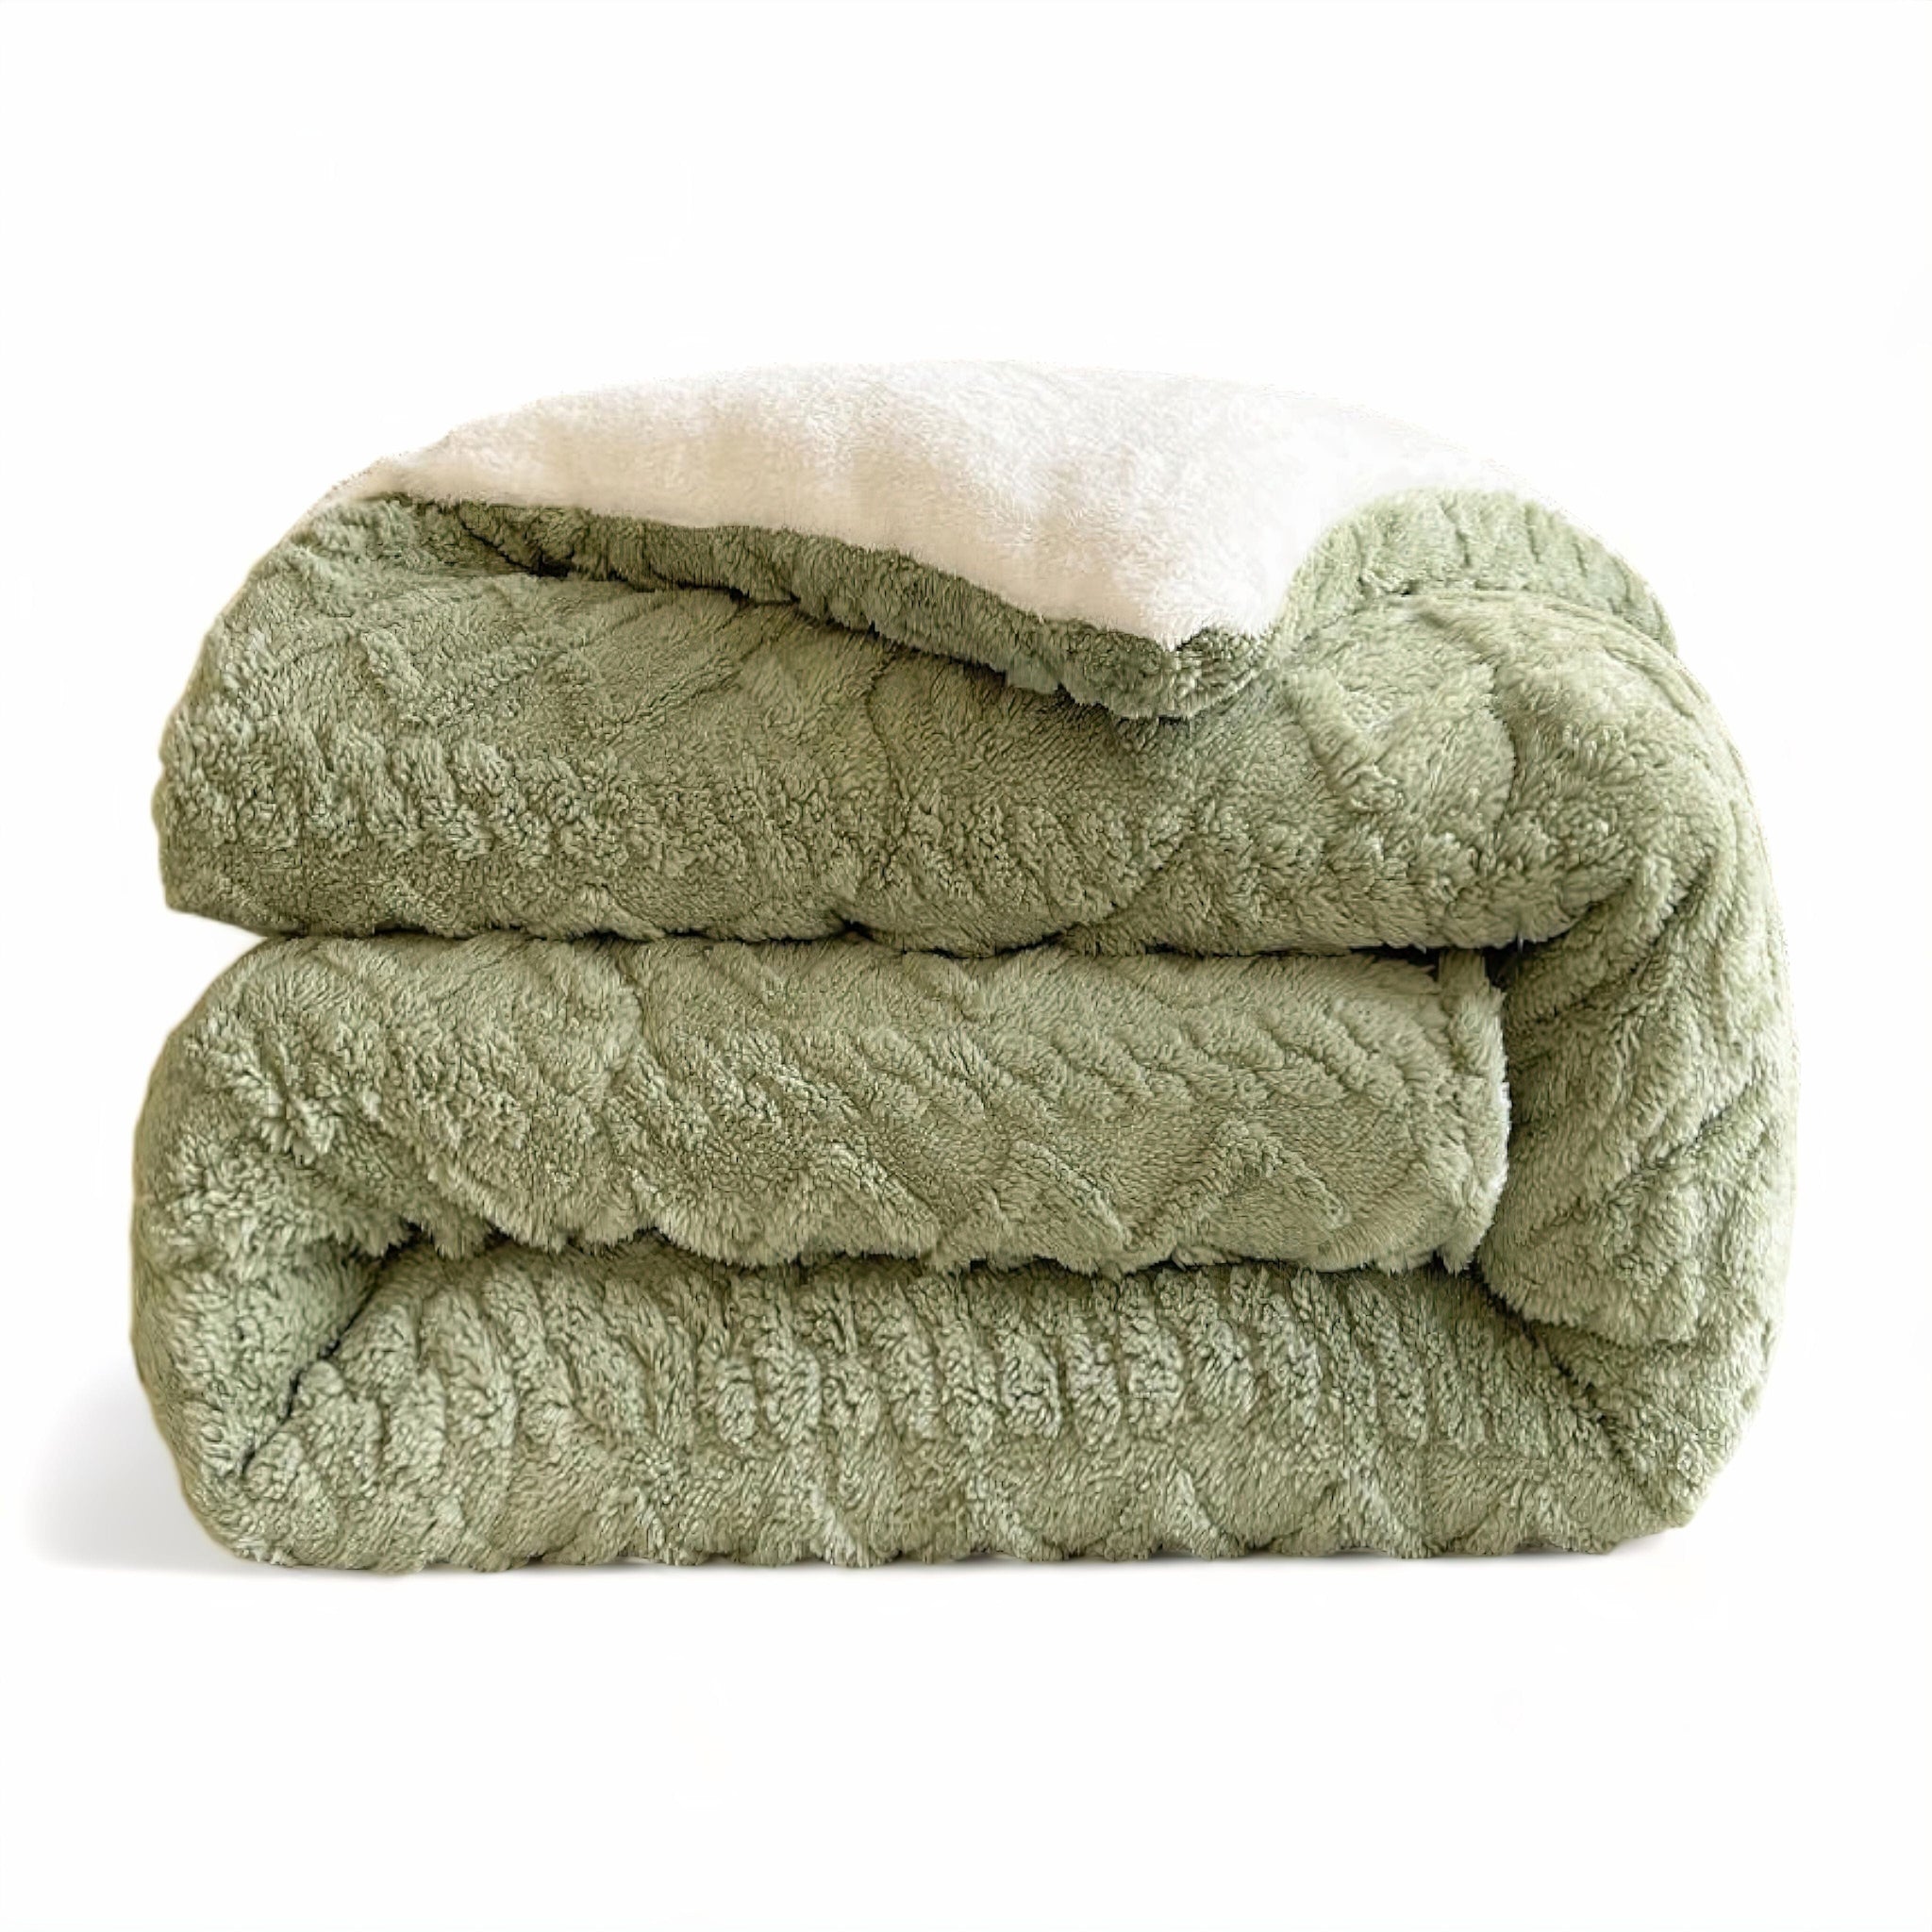 Marcella Ultra Thick Blanket Green 150 x 200cm (2kg) 